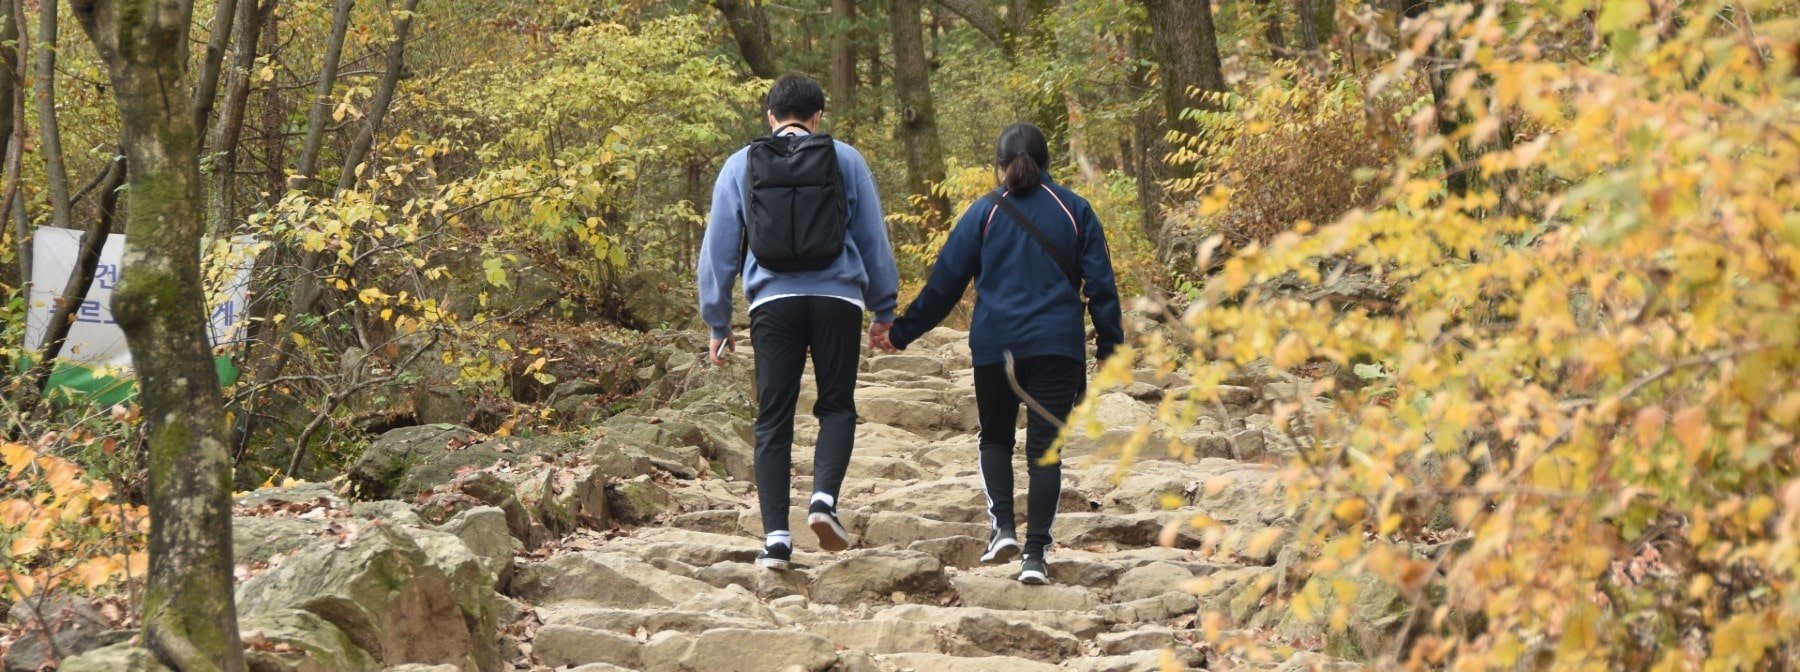 Walking With Your Partner Could Be Slowing You Down New Study Says